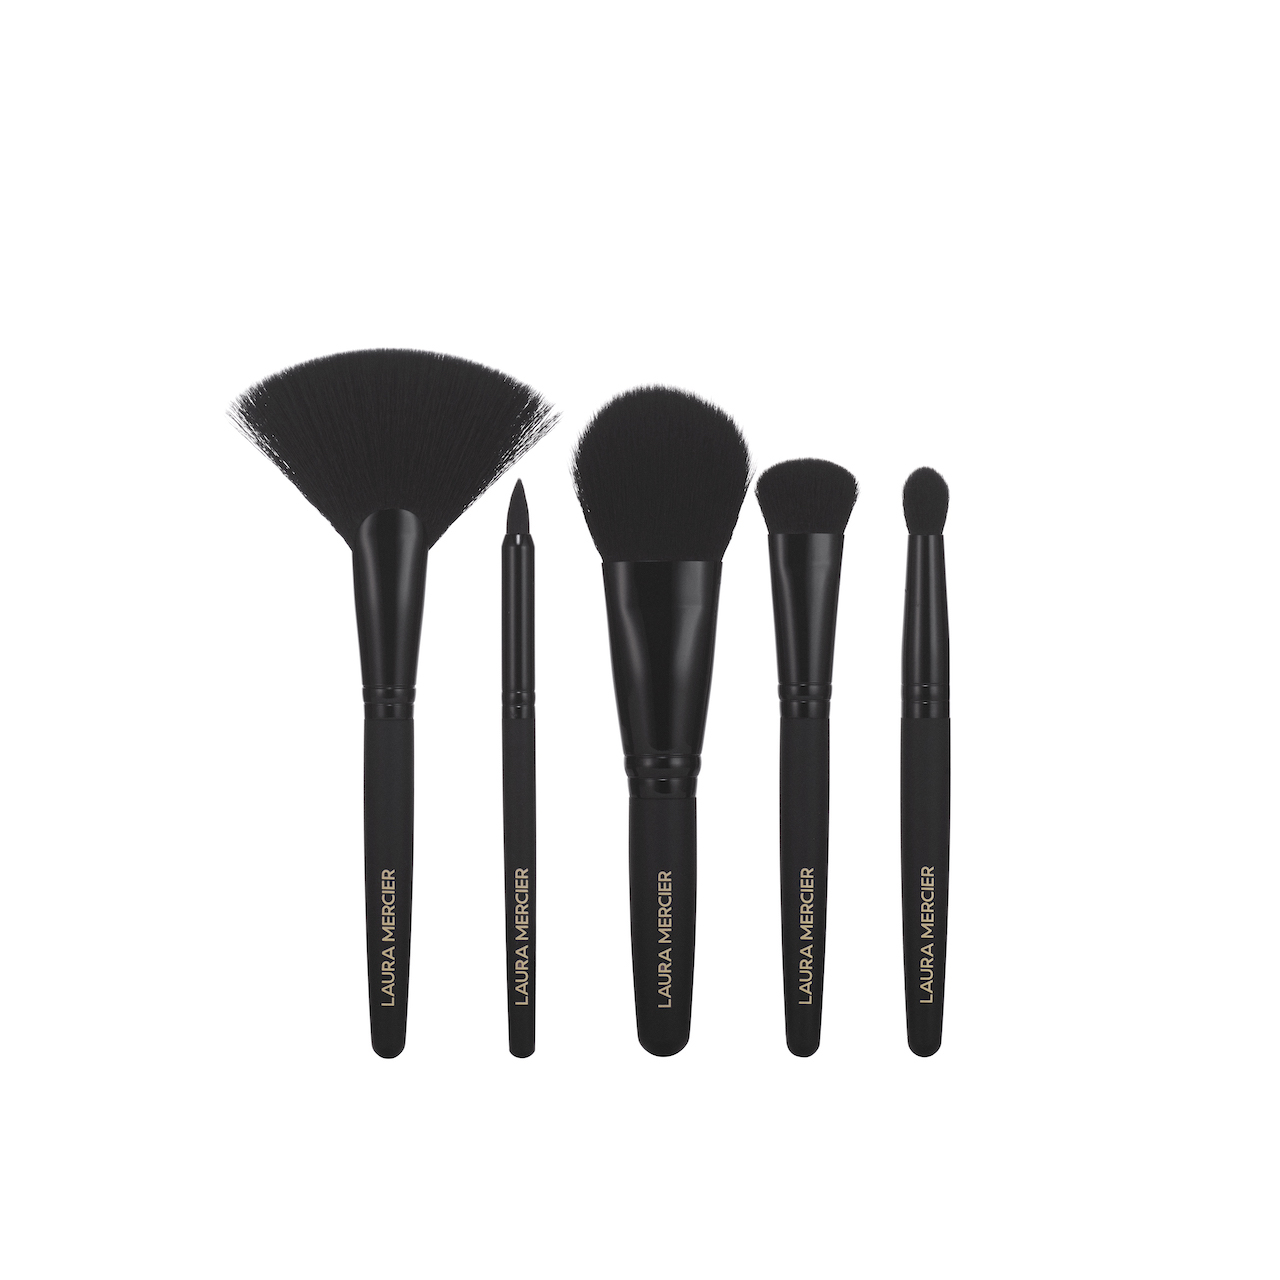 HOLIDAY SETS TOOLS OF THE TRADE BRUSH COLLECTION (SET DE BROCHAS)